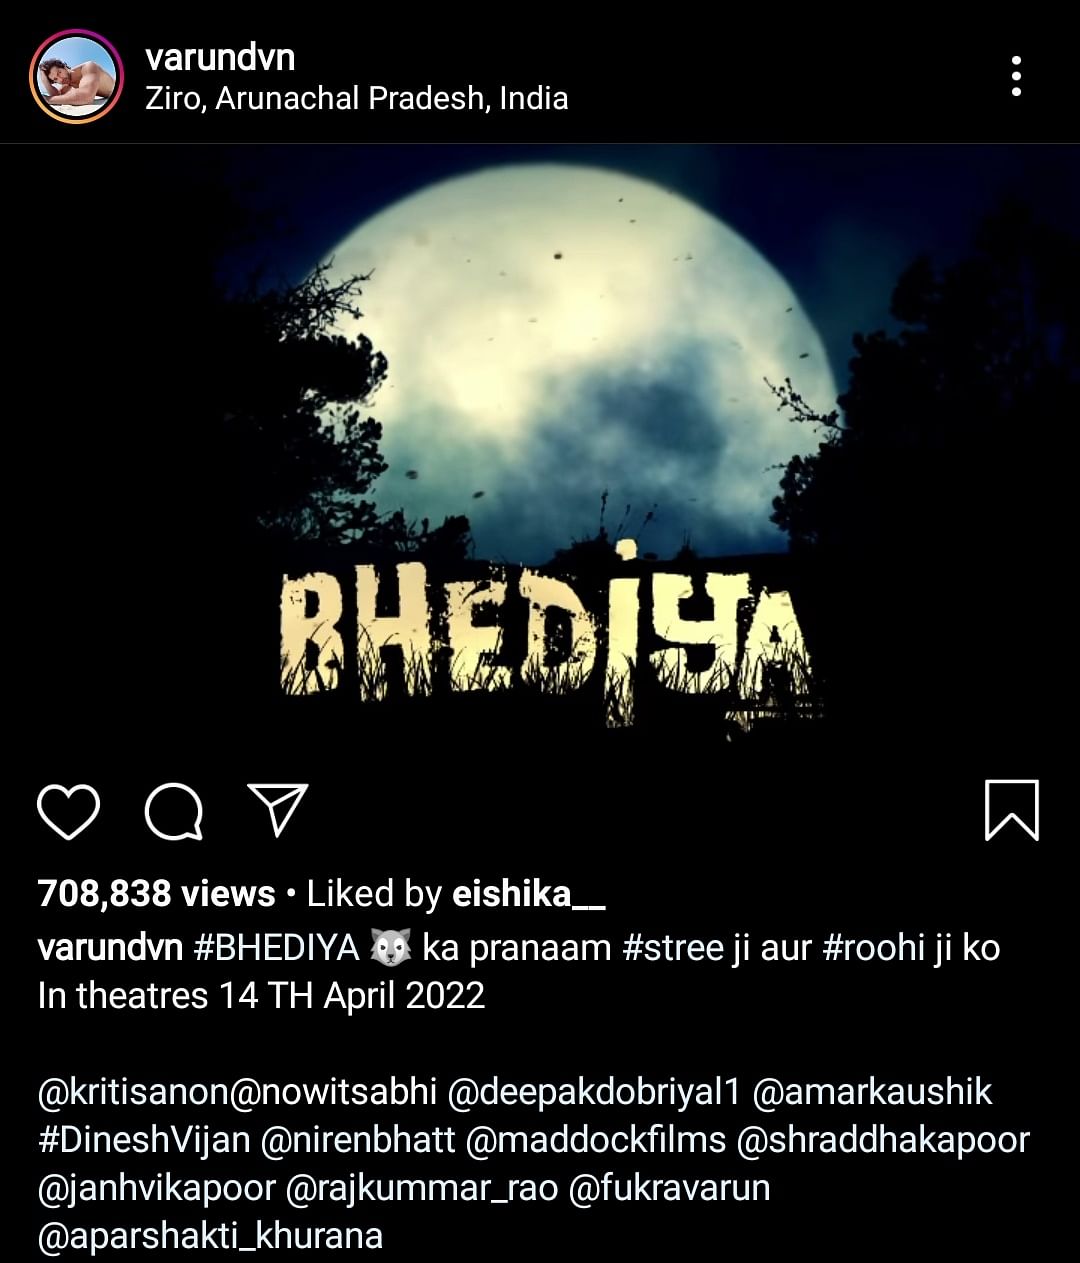 Actors Varun Dhawan and Kriti Sanon share teaser for the upcoming horror flick.